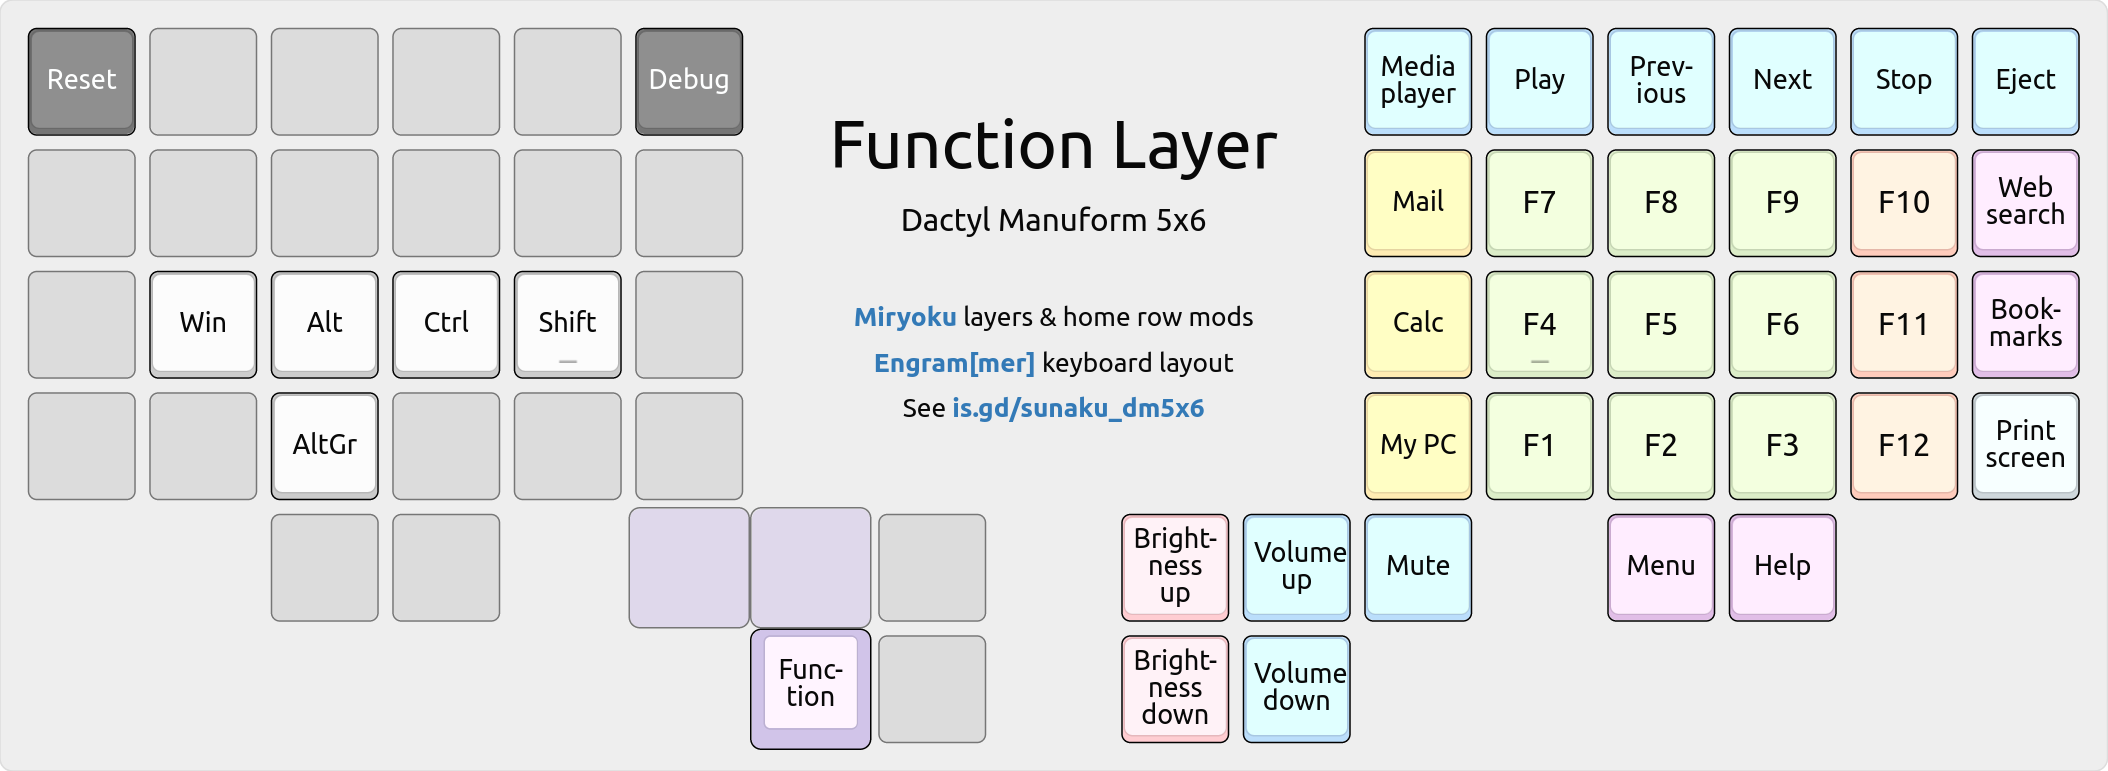 Diagram of the function layer.